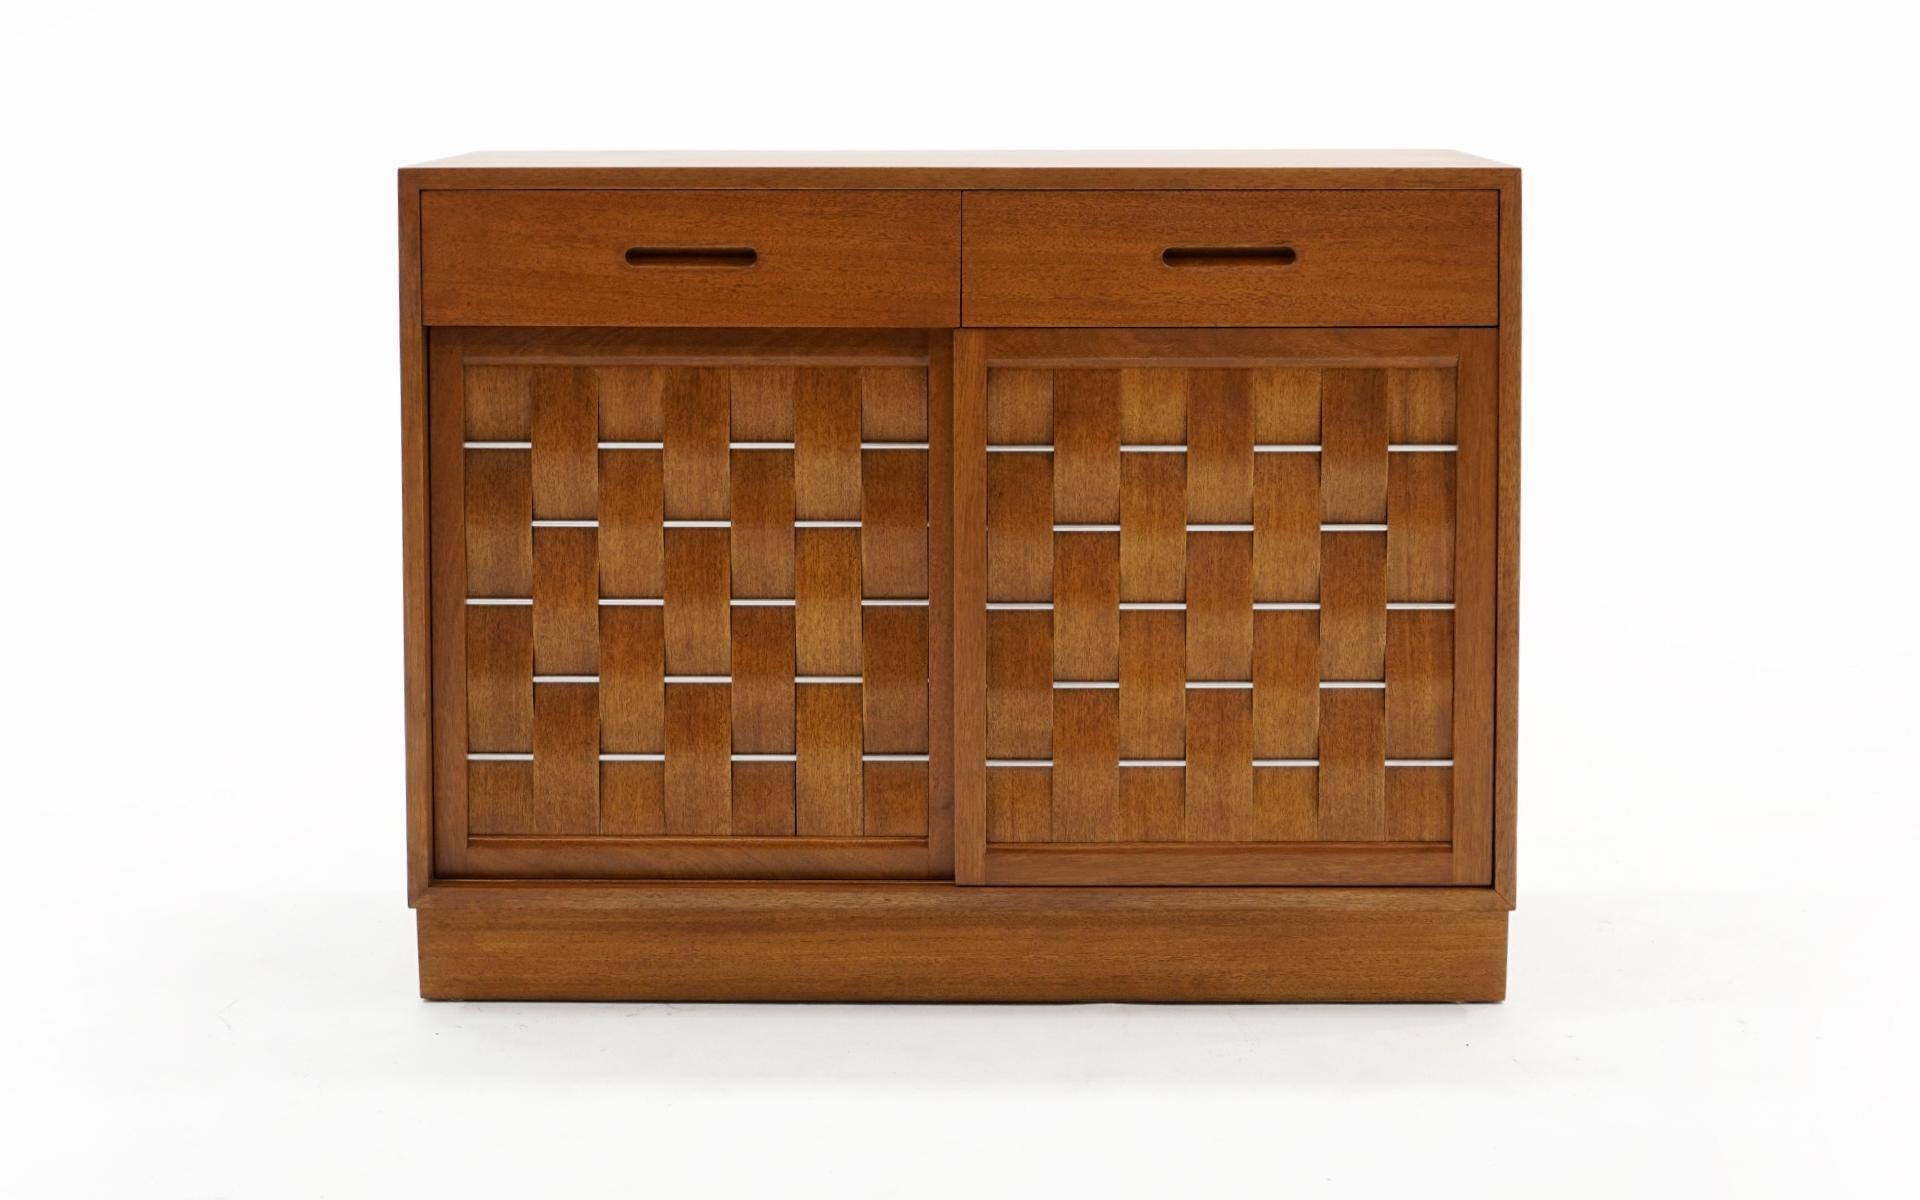 Mahogany storage cabinet with woven sliding doors and drawers designed by Edward Wormley for Dunbar. The two sliding doors have fronts woven with thin pieces of mahogany and nickel plated steel. Two drawers are above the sliding doors and another